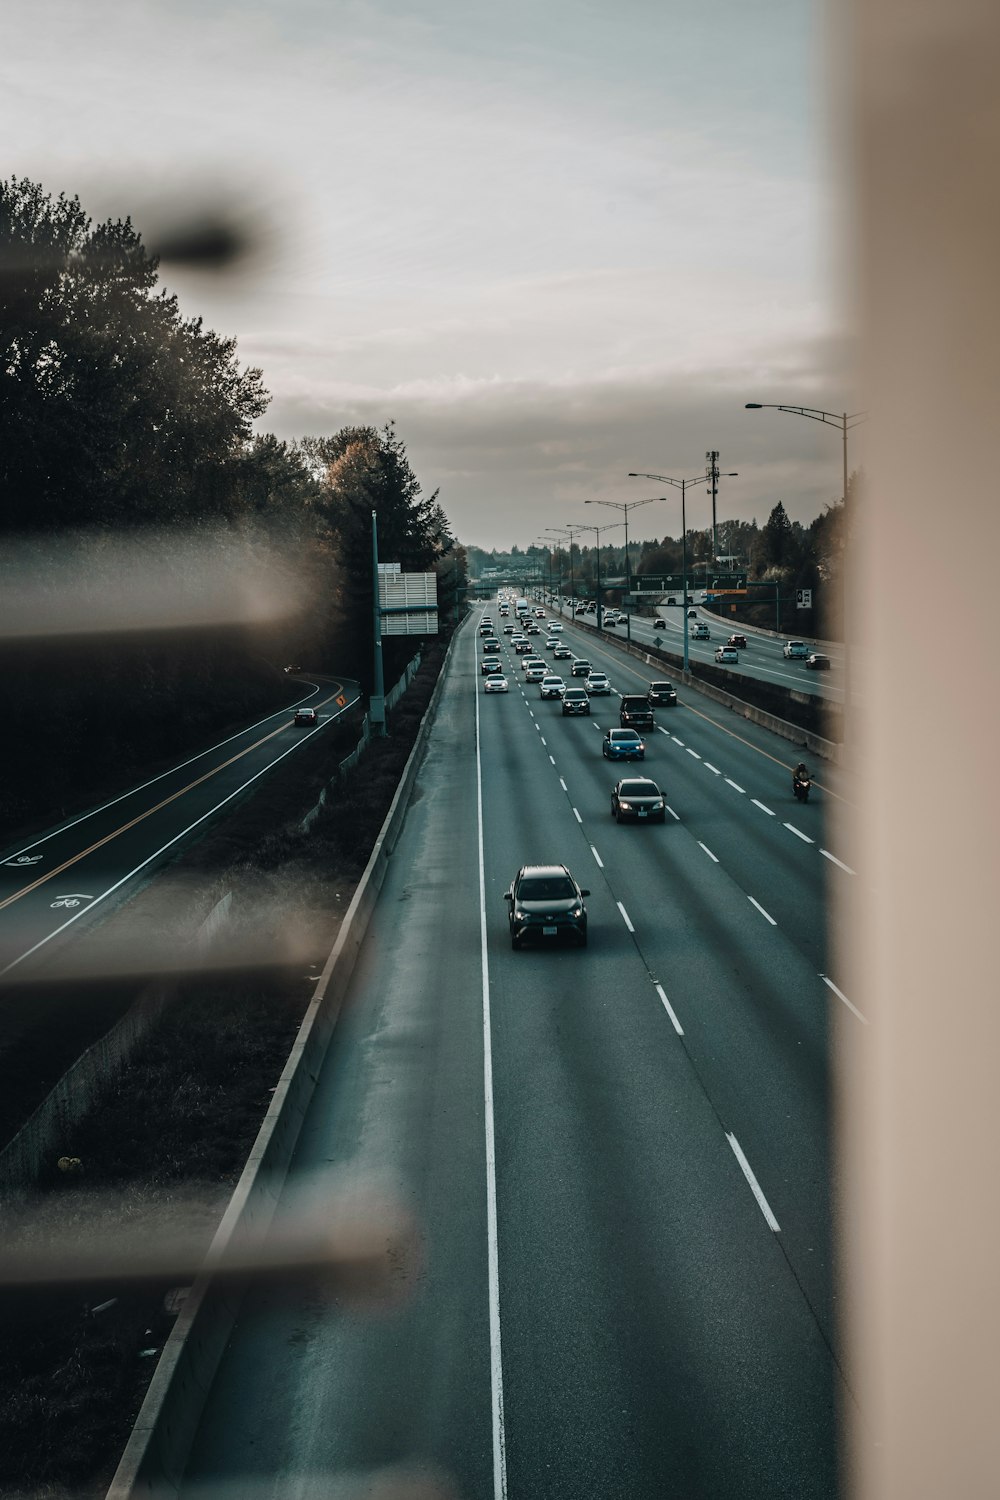 a view of a highway with cars driving on it